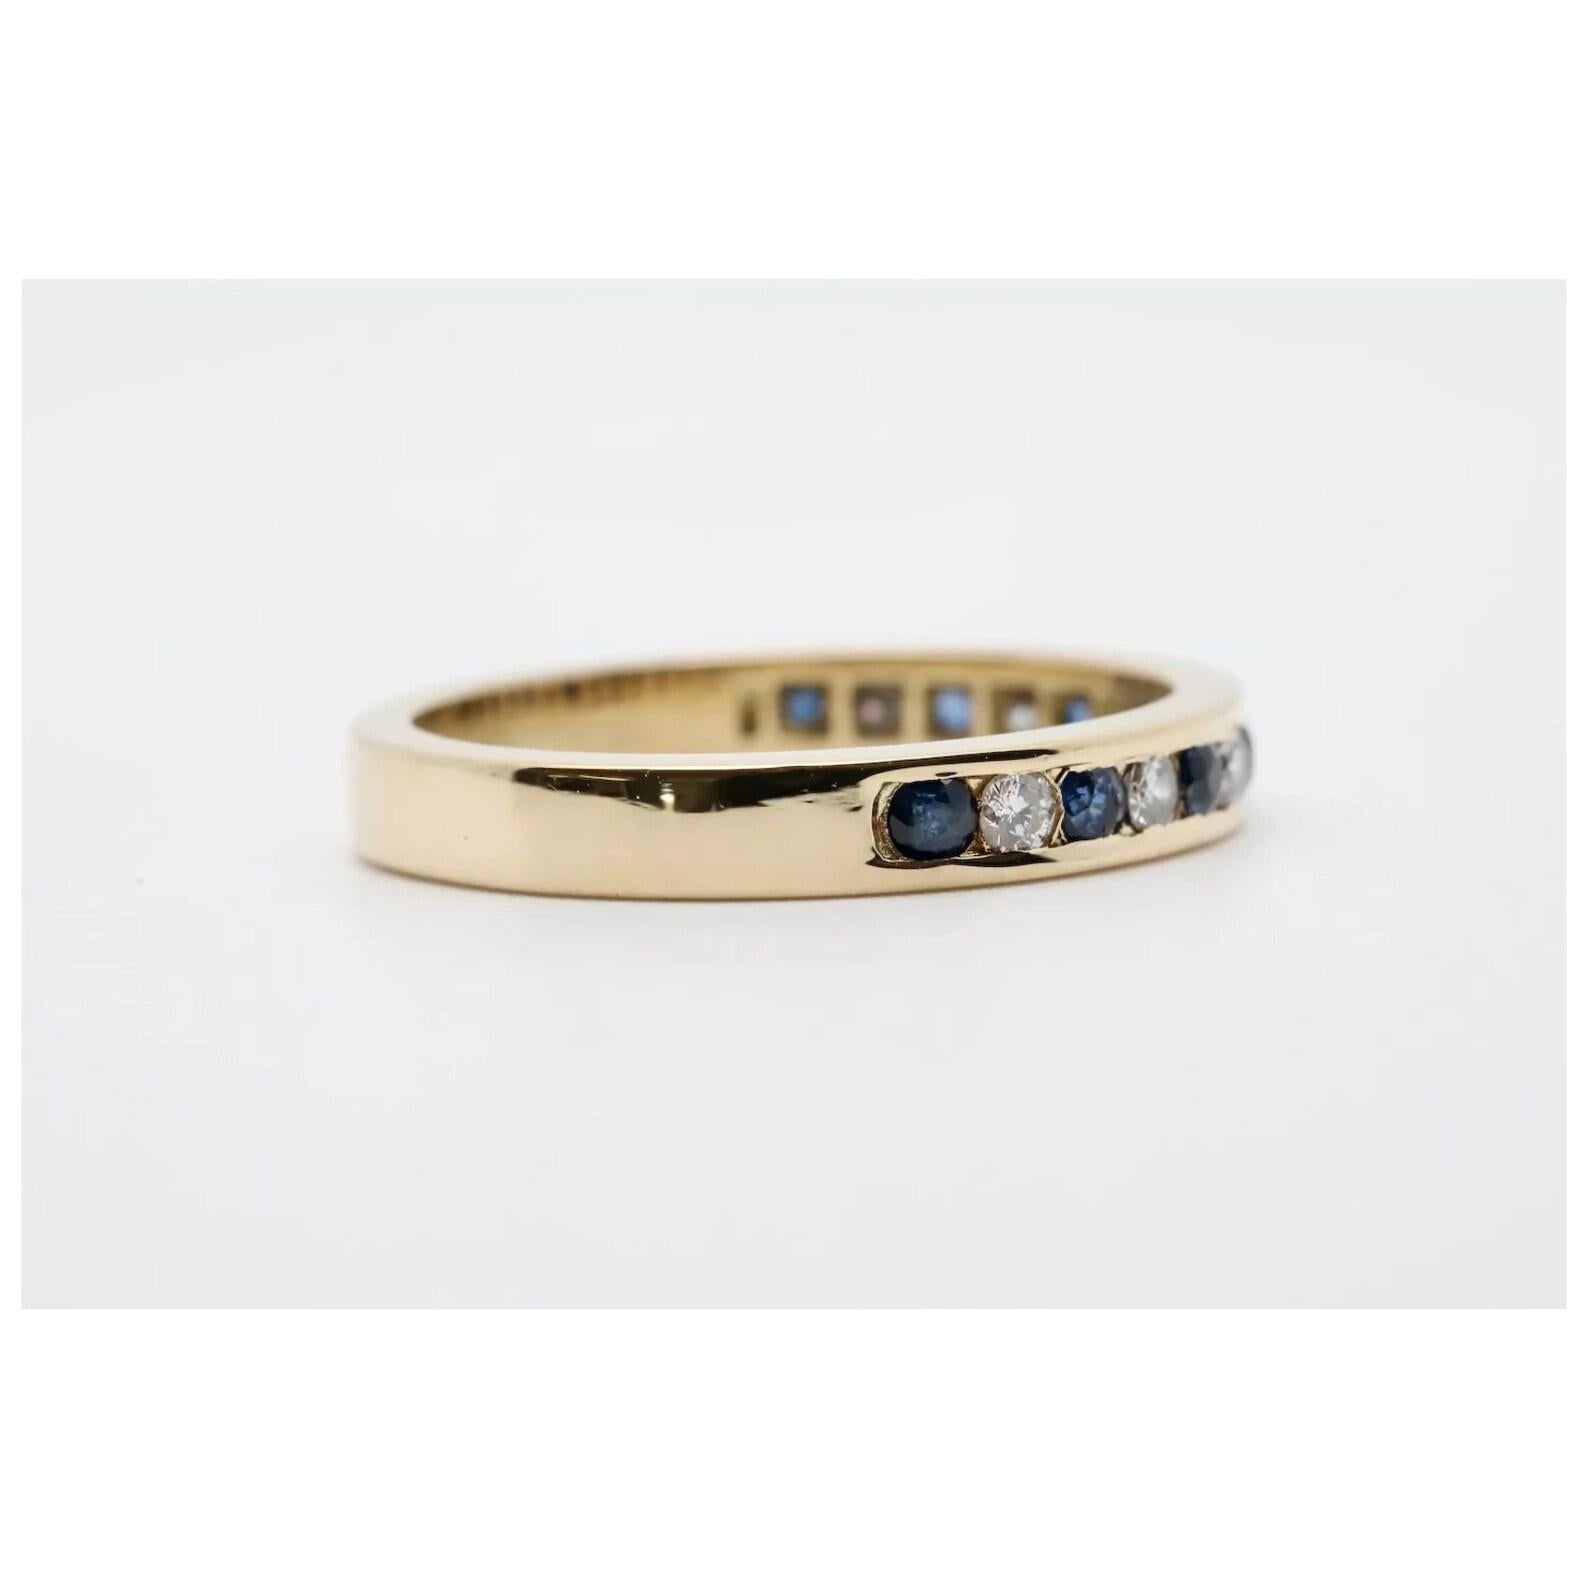 A vintage sapphire, and diamond wedding band in 18 karat gold. Channel set with 7 brilliant cut diamonds and 8 brilliant cut sapphires in richly polished yellow gold. The diamonds weigh a combined 0.14 carats and grade as H color, VS1 clarity with